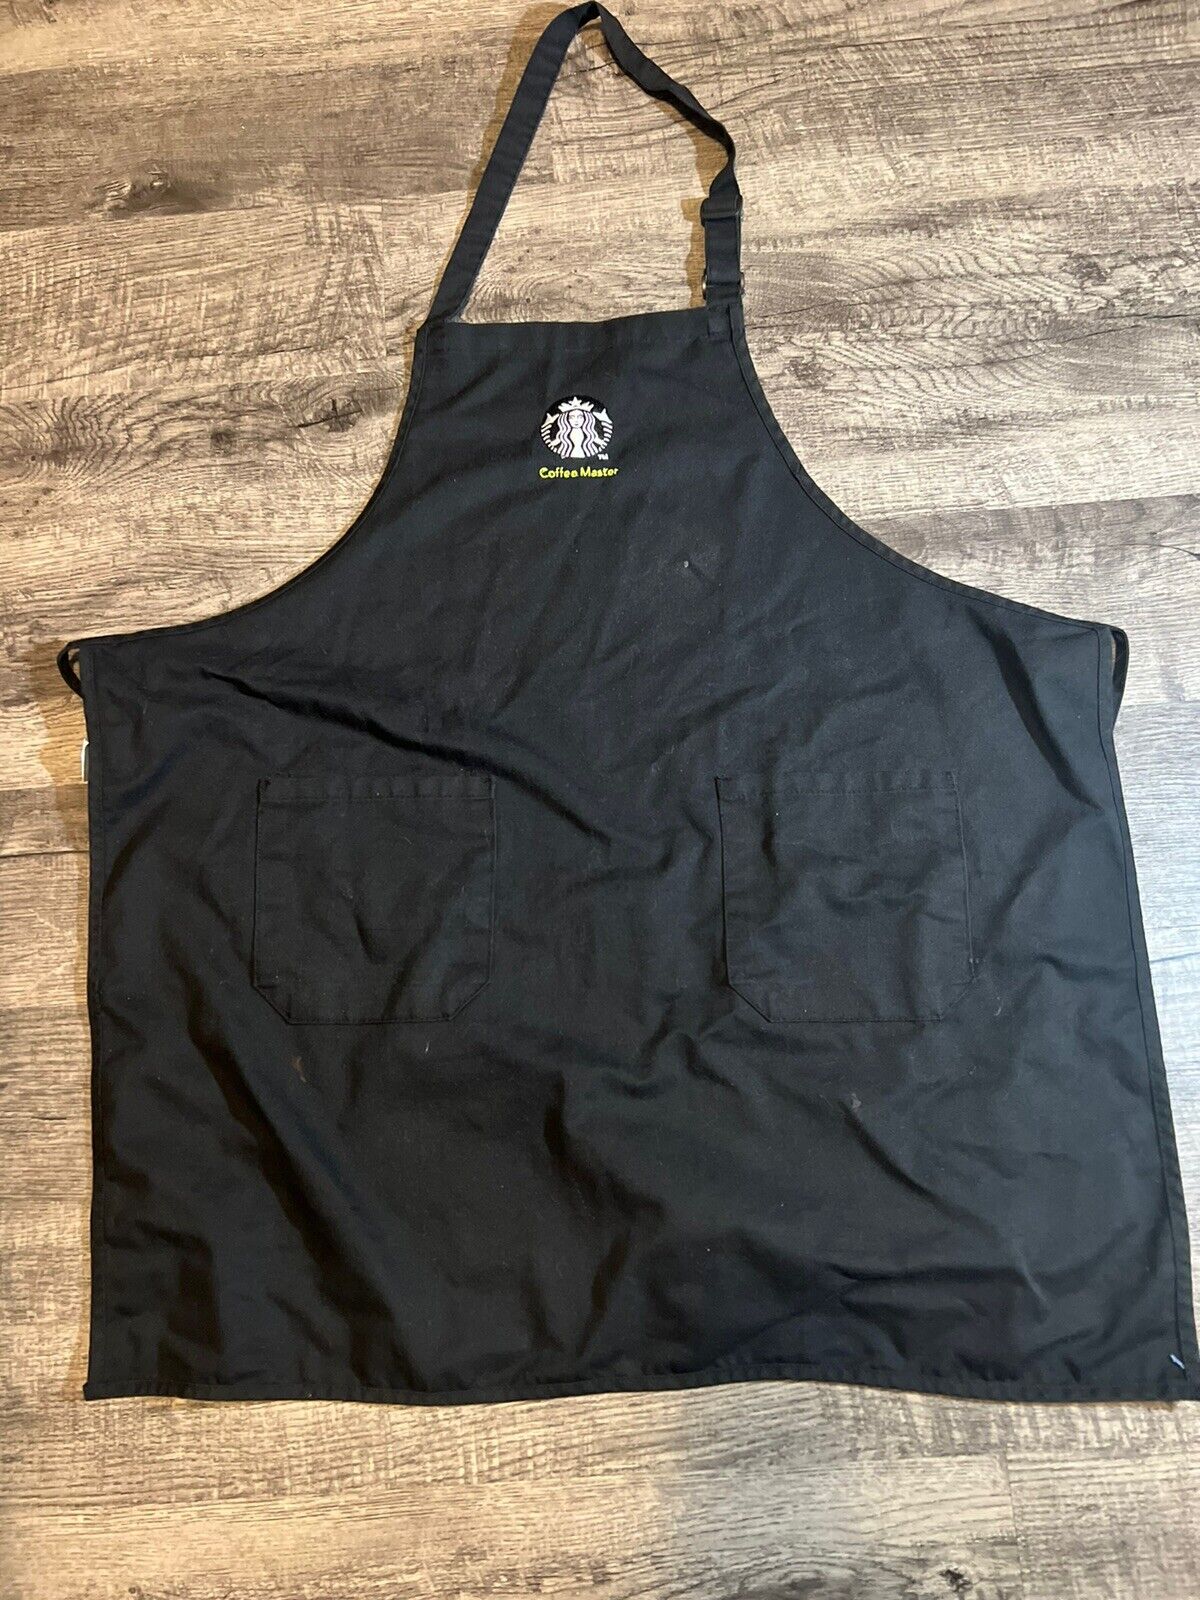 Starbucks Official coffee master apron - Rare. Used.